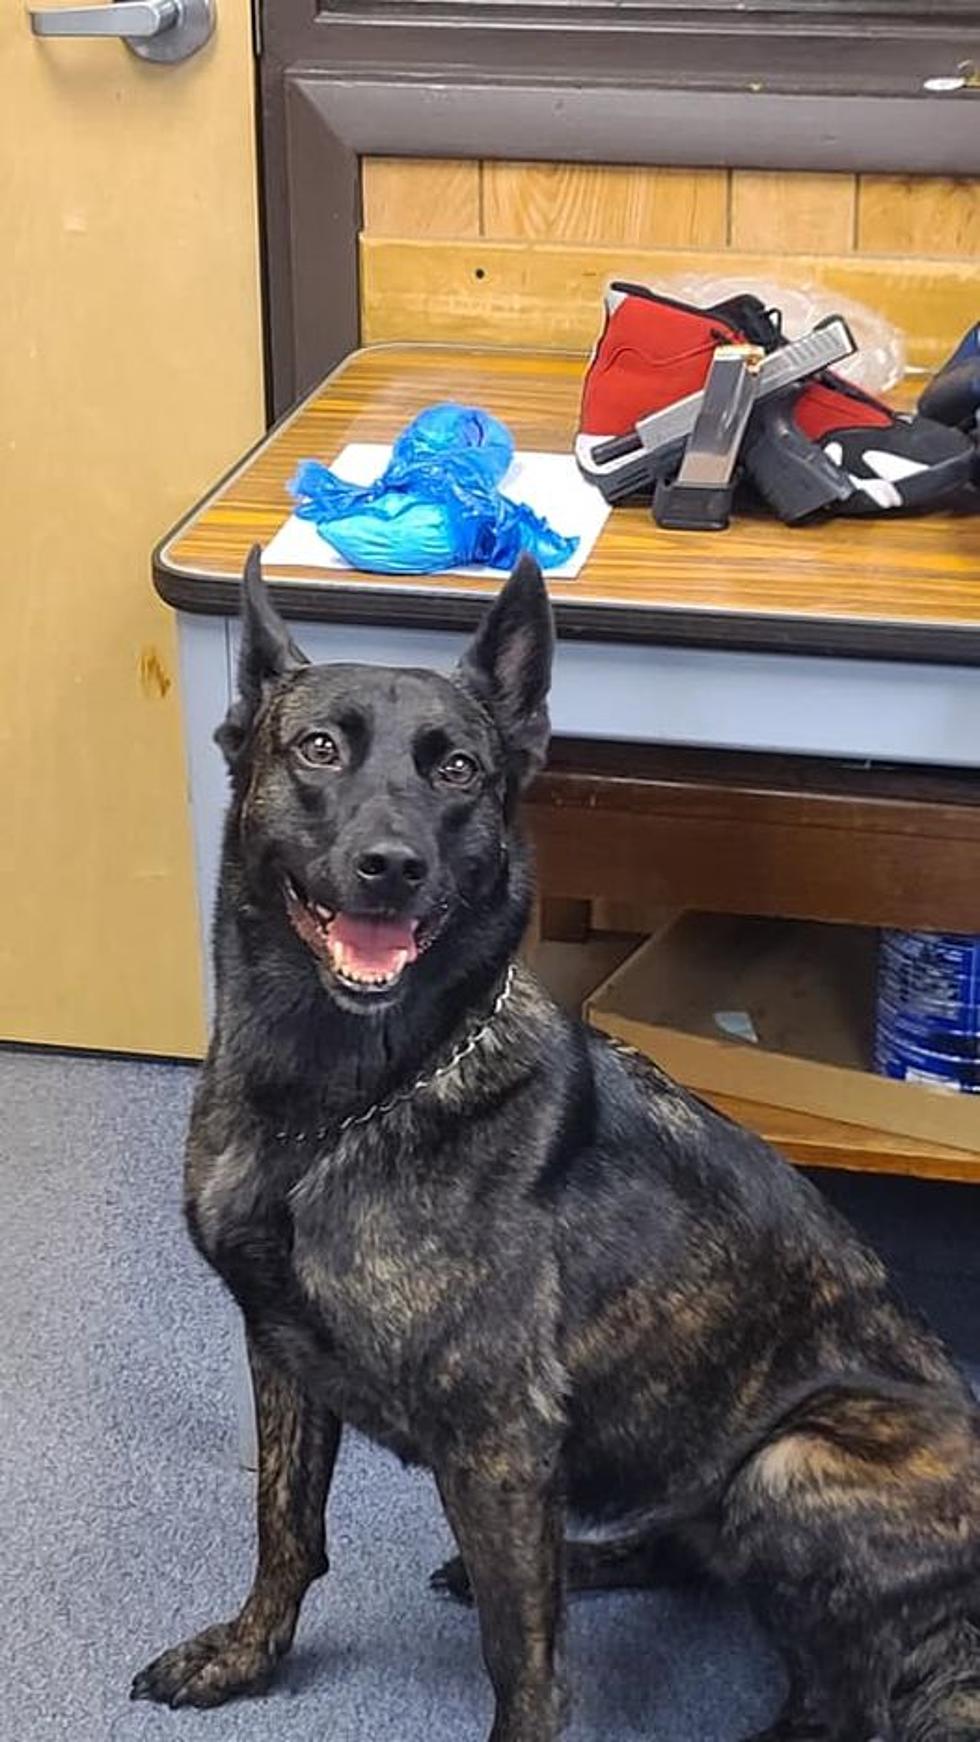 K9 Amber Sniffs Out Cocaine and Handgun During Albany Arrest